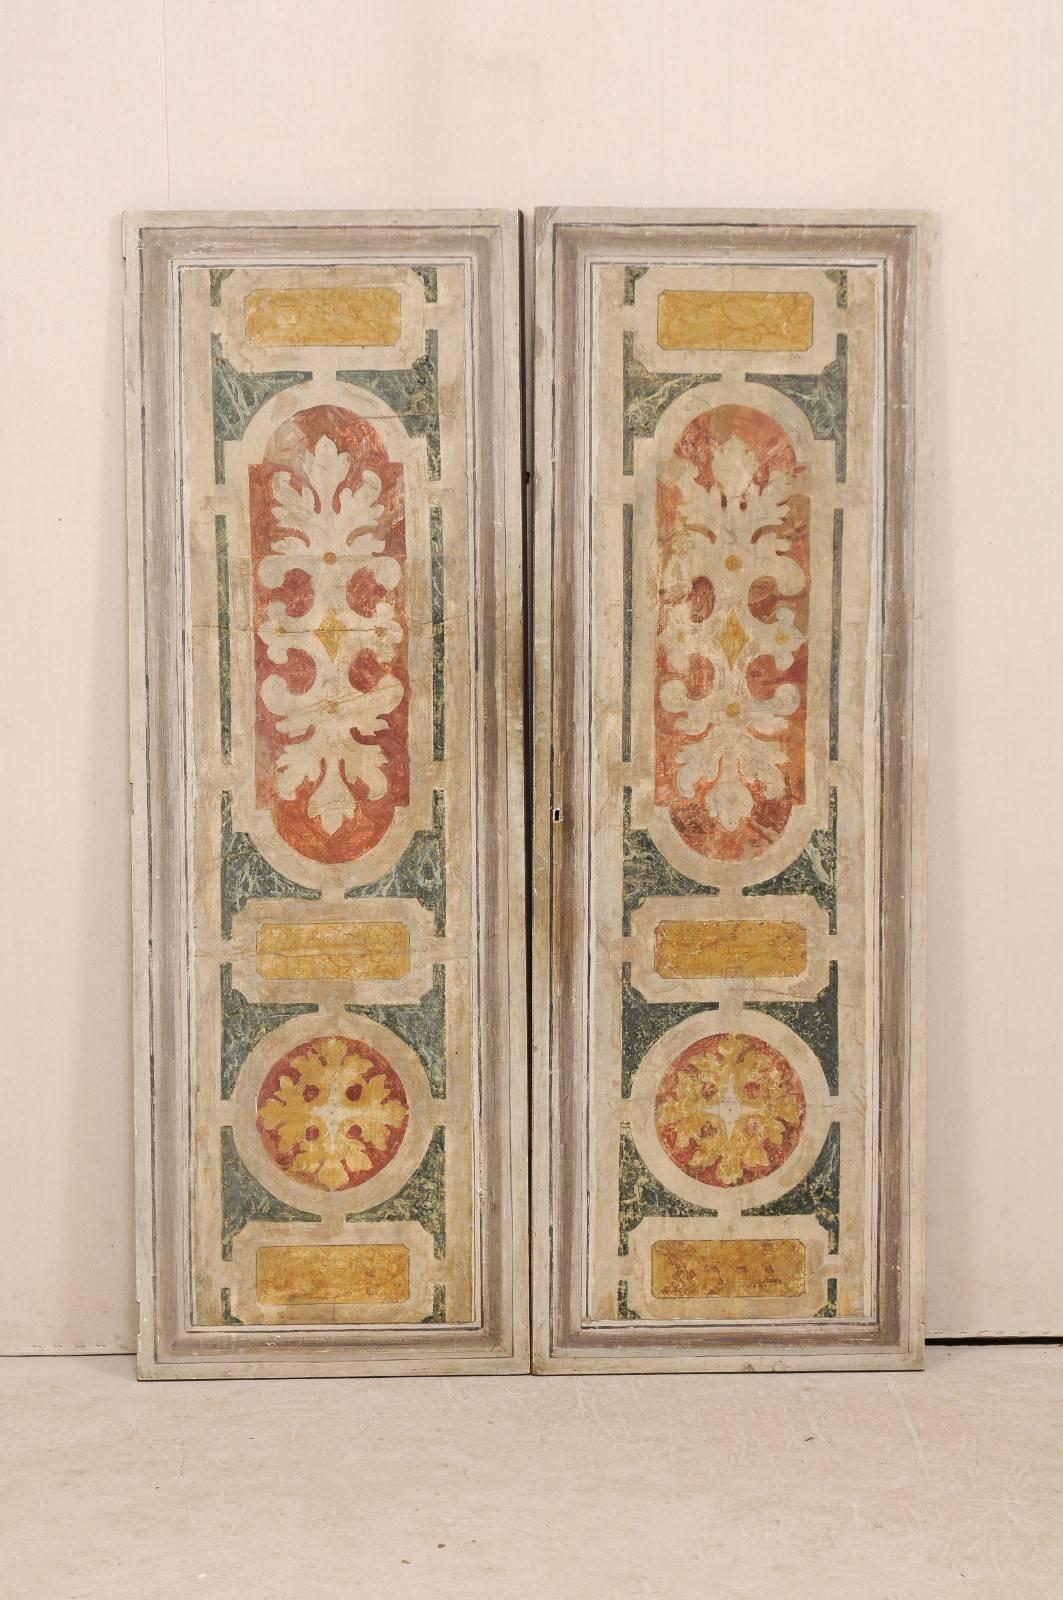 A pair of Italian wooden doors, decoratively painted, from the mid-20th century. This pair of vintage Italian doors feature a single front recessed panel painted with foliage and geometric designs in various shades of gray, muted gold, ocher red,